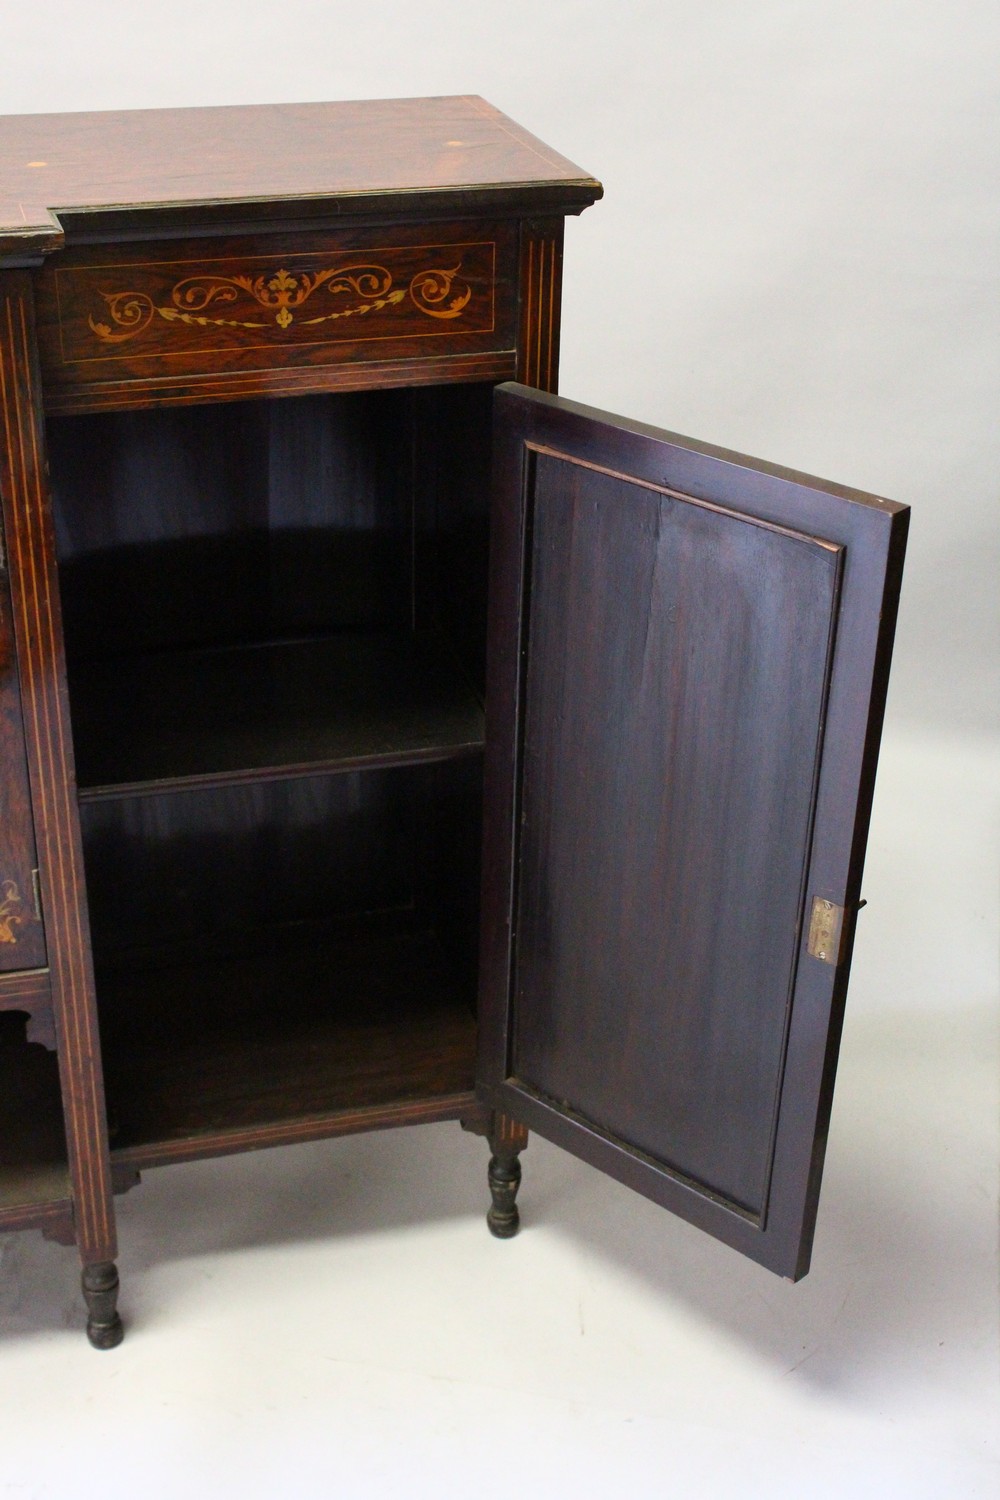 AN EDWARDIAN ROSEWOOD INLAID BREAKFRONT CUPBOARD, the centre with two oval mirrored doors with shelf - Image 12 of 13